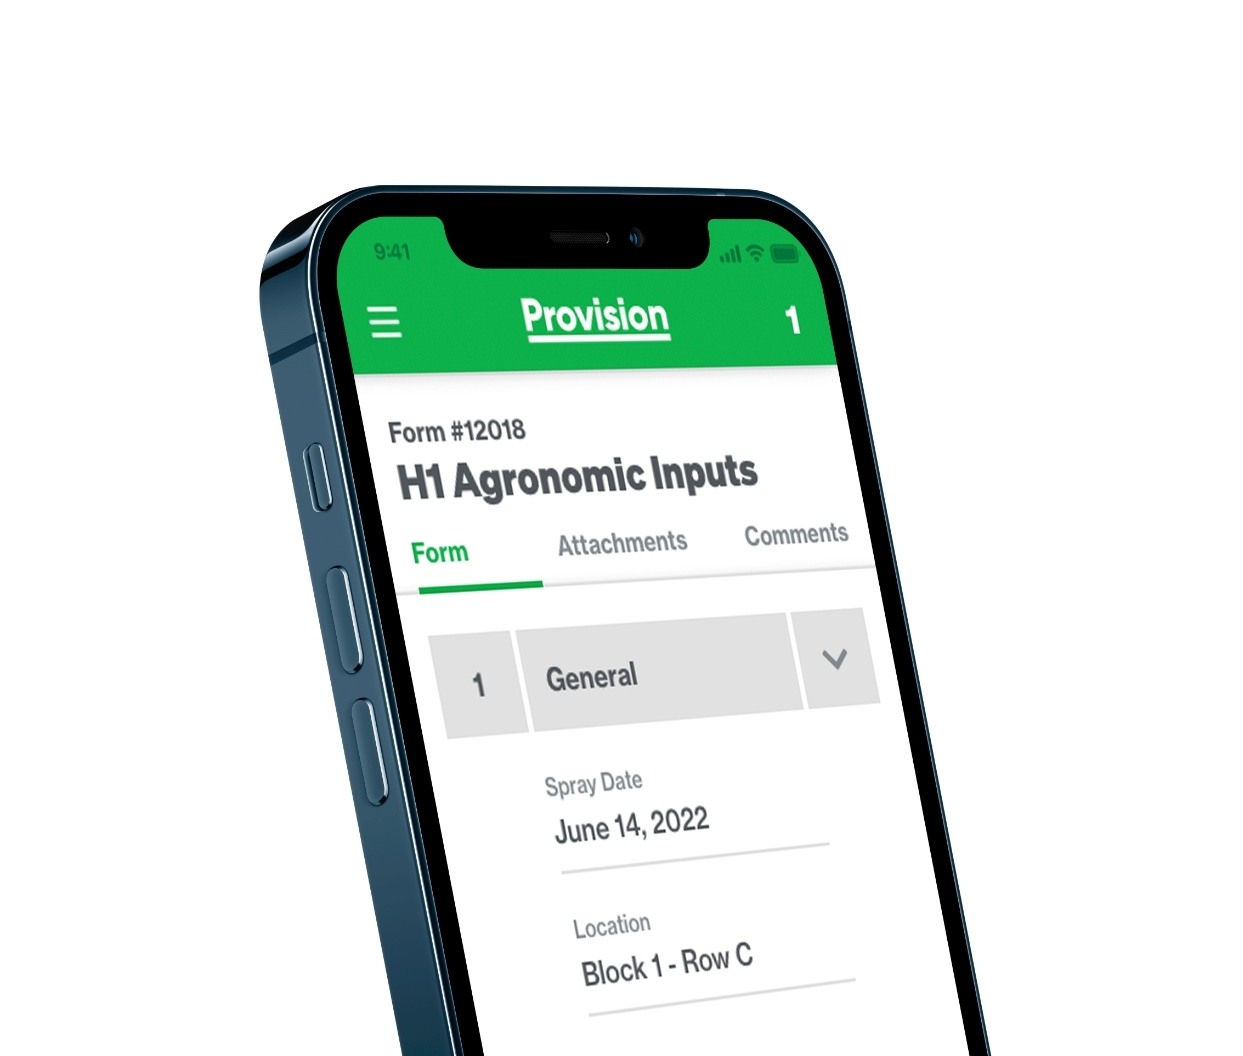 Provision App H1 Agronomic Inputs on Mobile